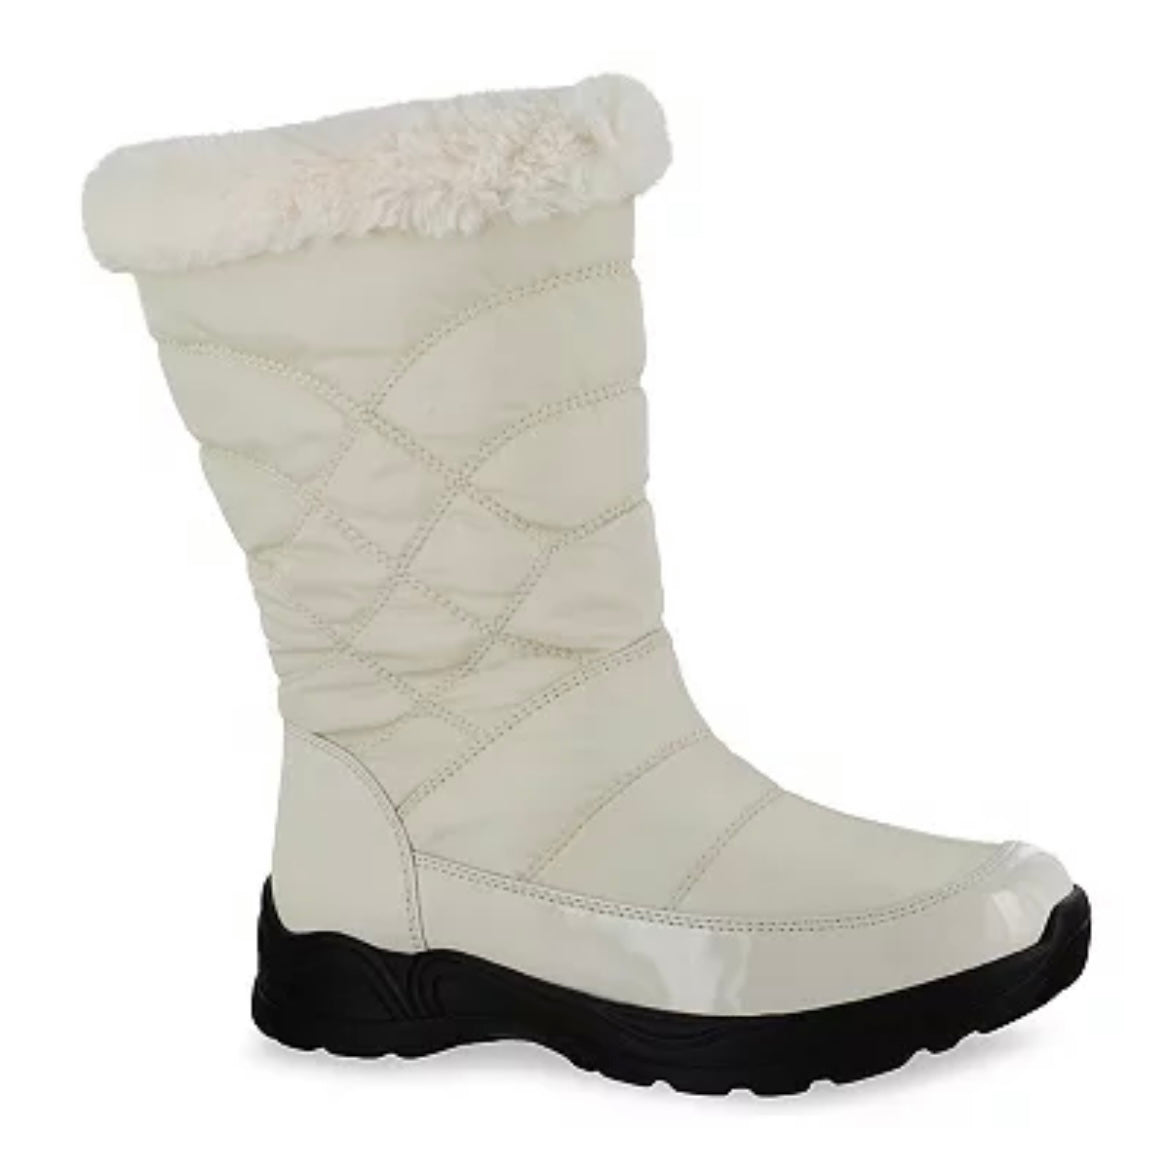 CUDDLE Waterproof White Easy Dry Women's Snow Boots